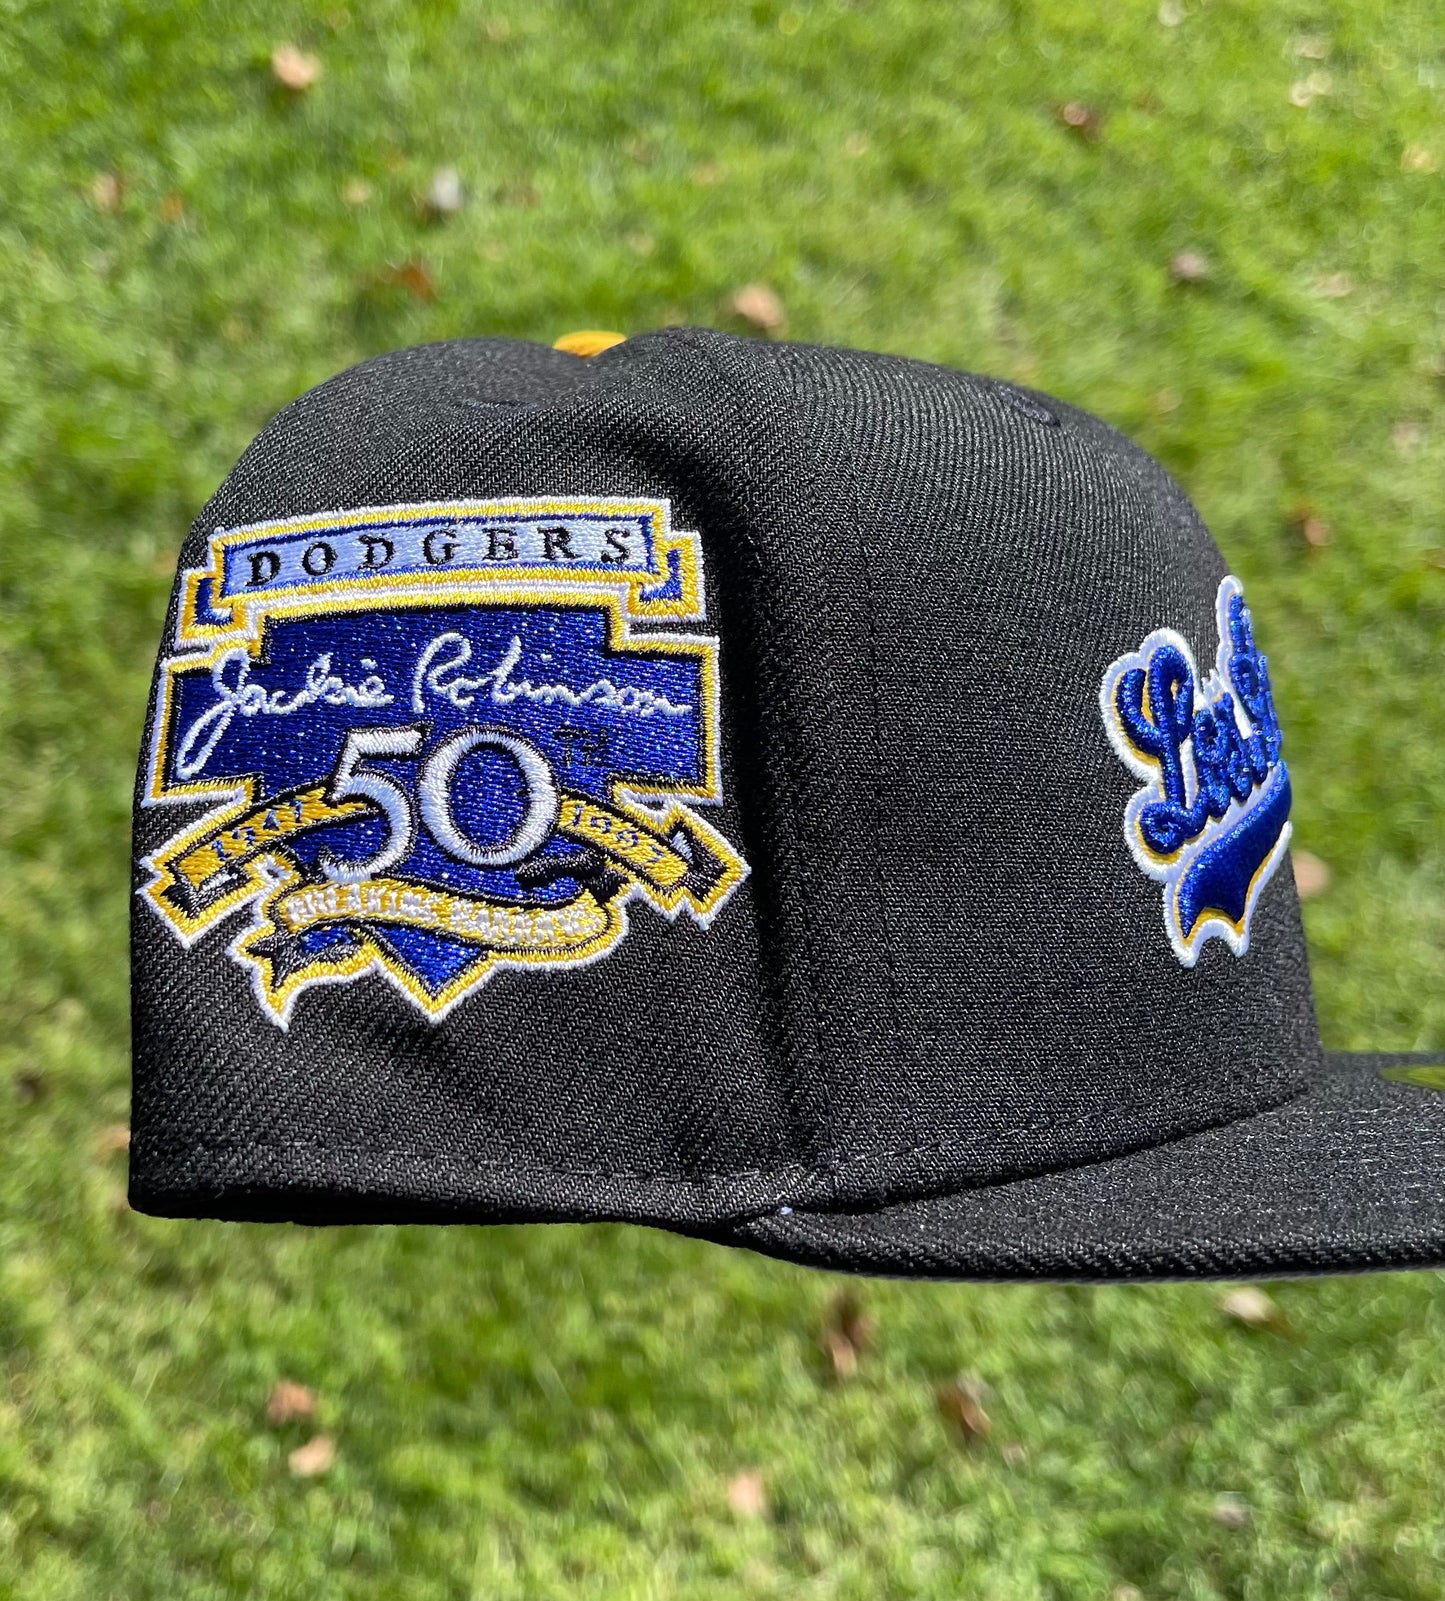 Los Angeles Dodgers Jackie Robinson 50th Anniversary Patch Fitted Hat (Black/Blue)